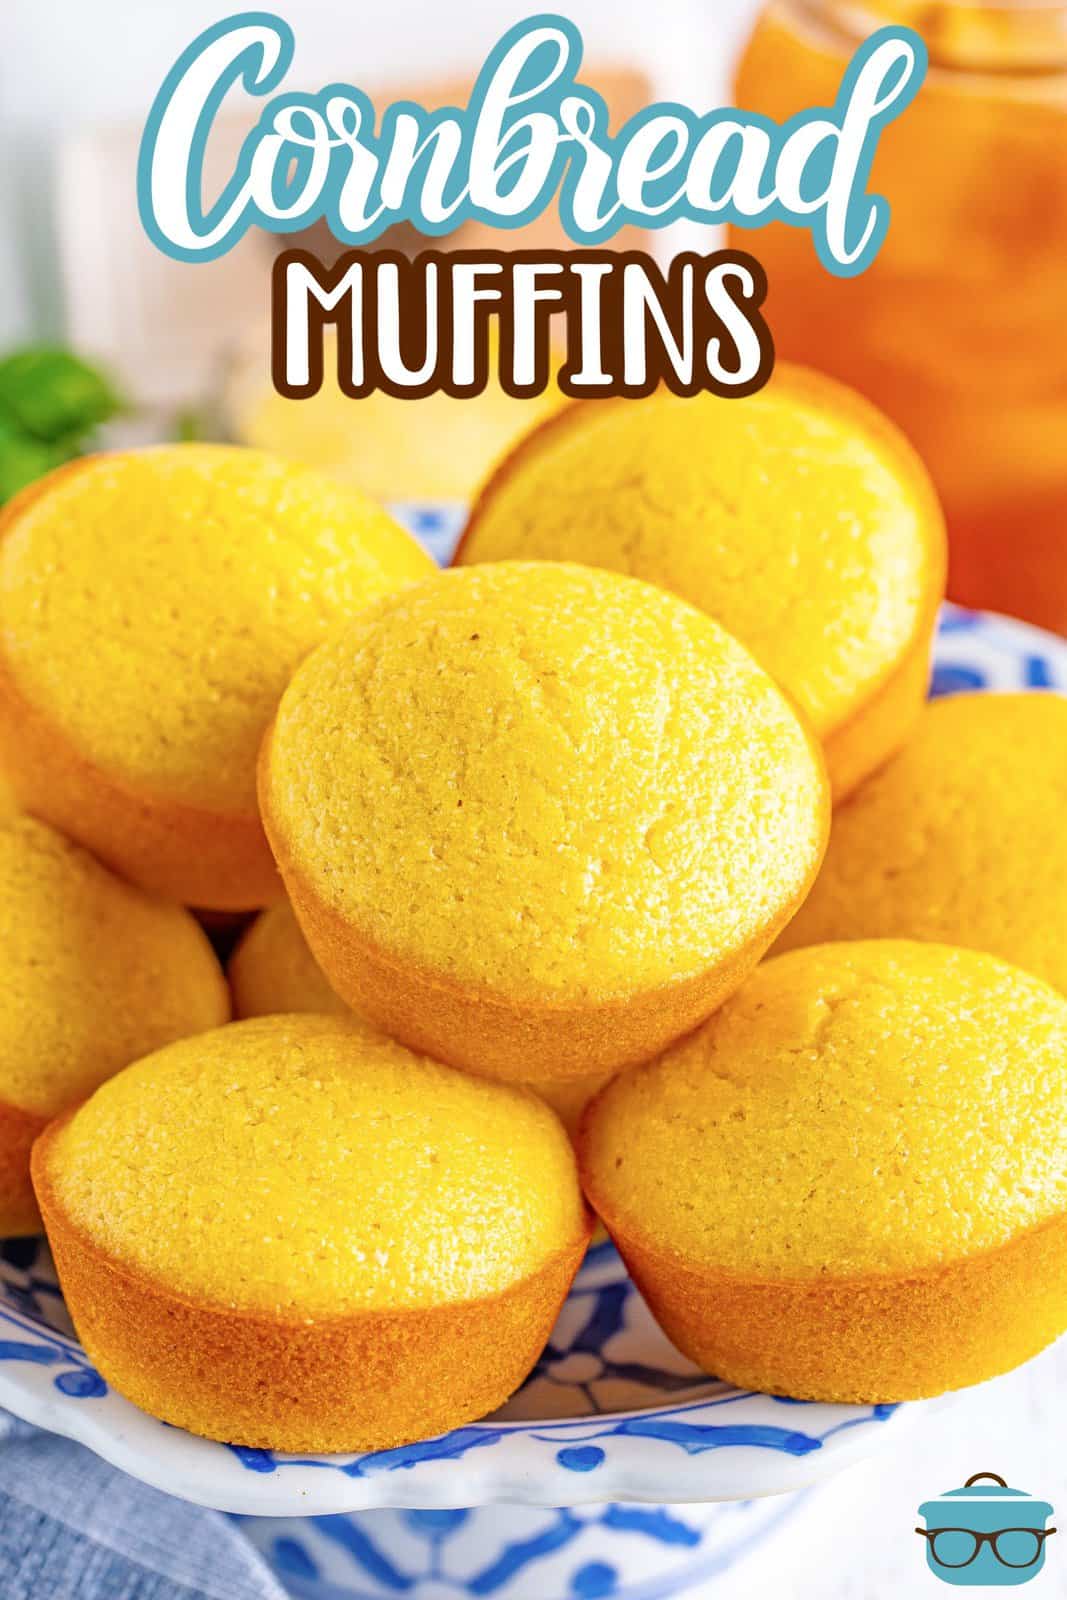 Looking at a mountain of Cornbread Muffins on a plate. 